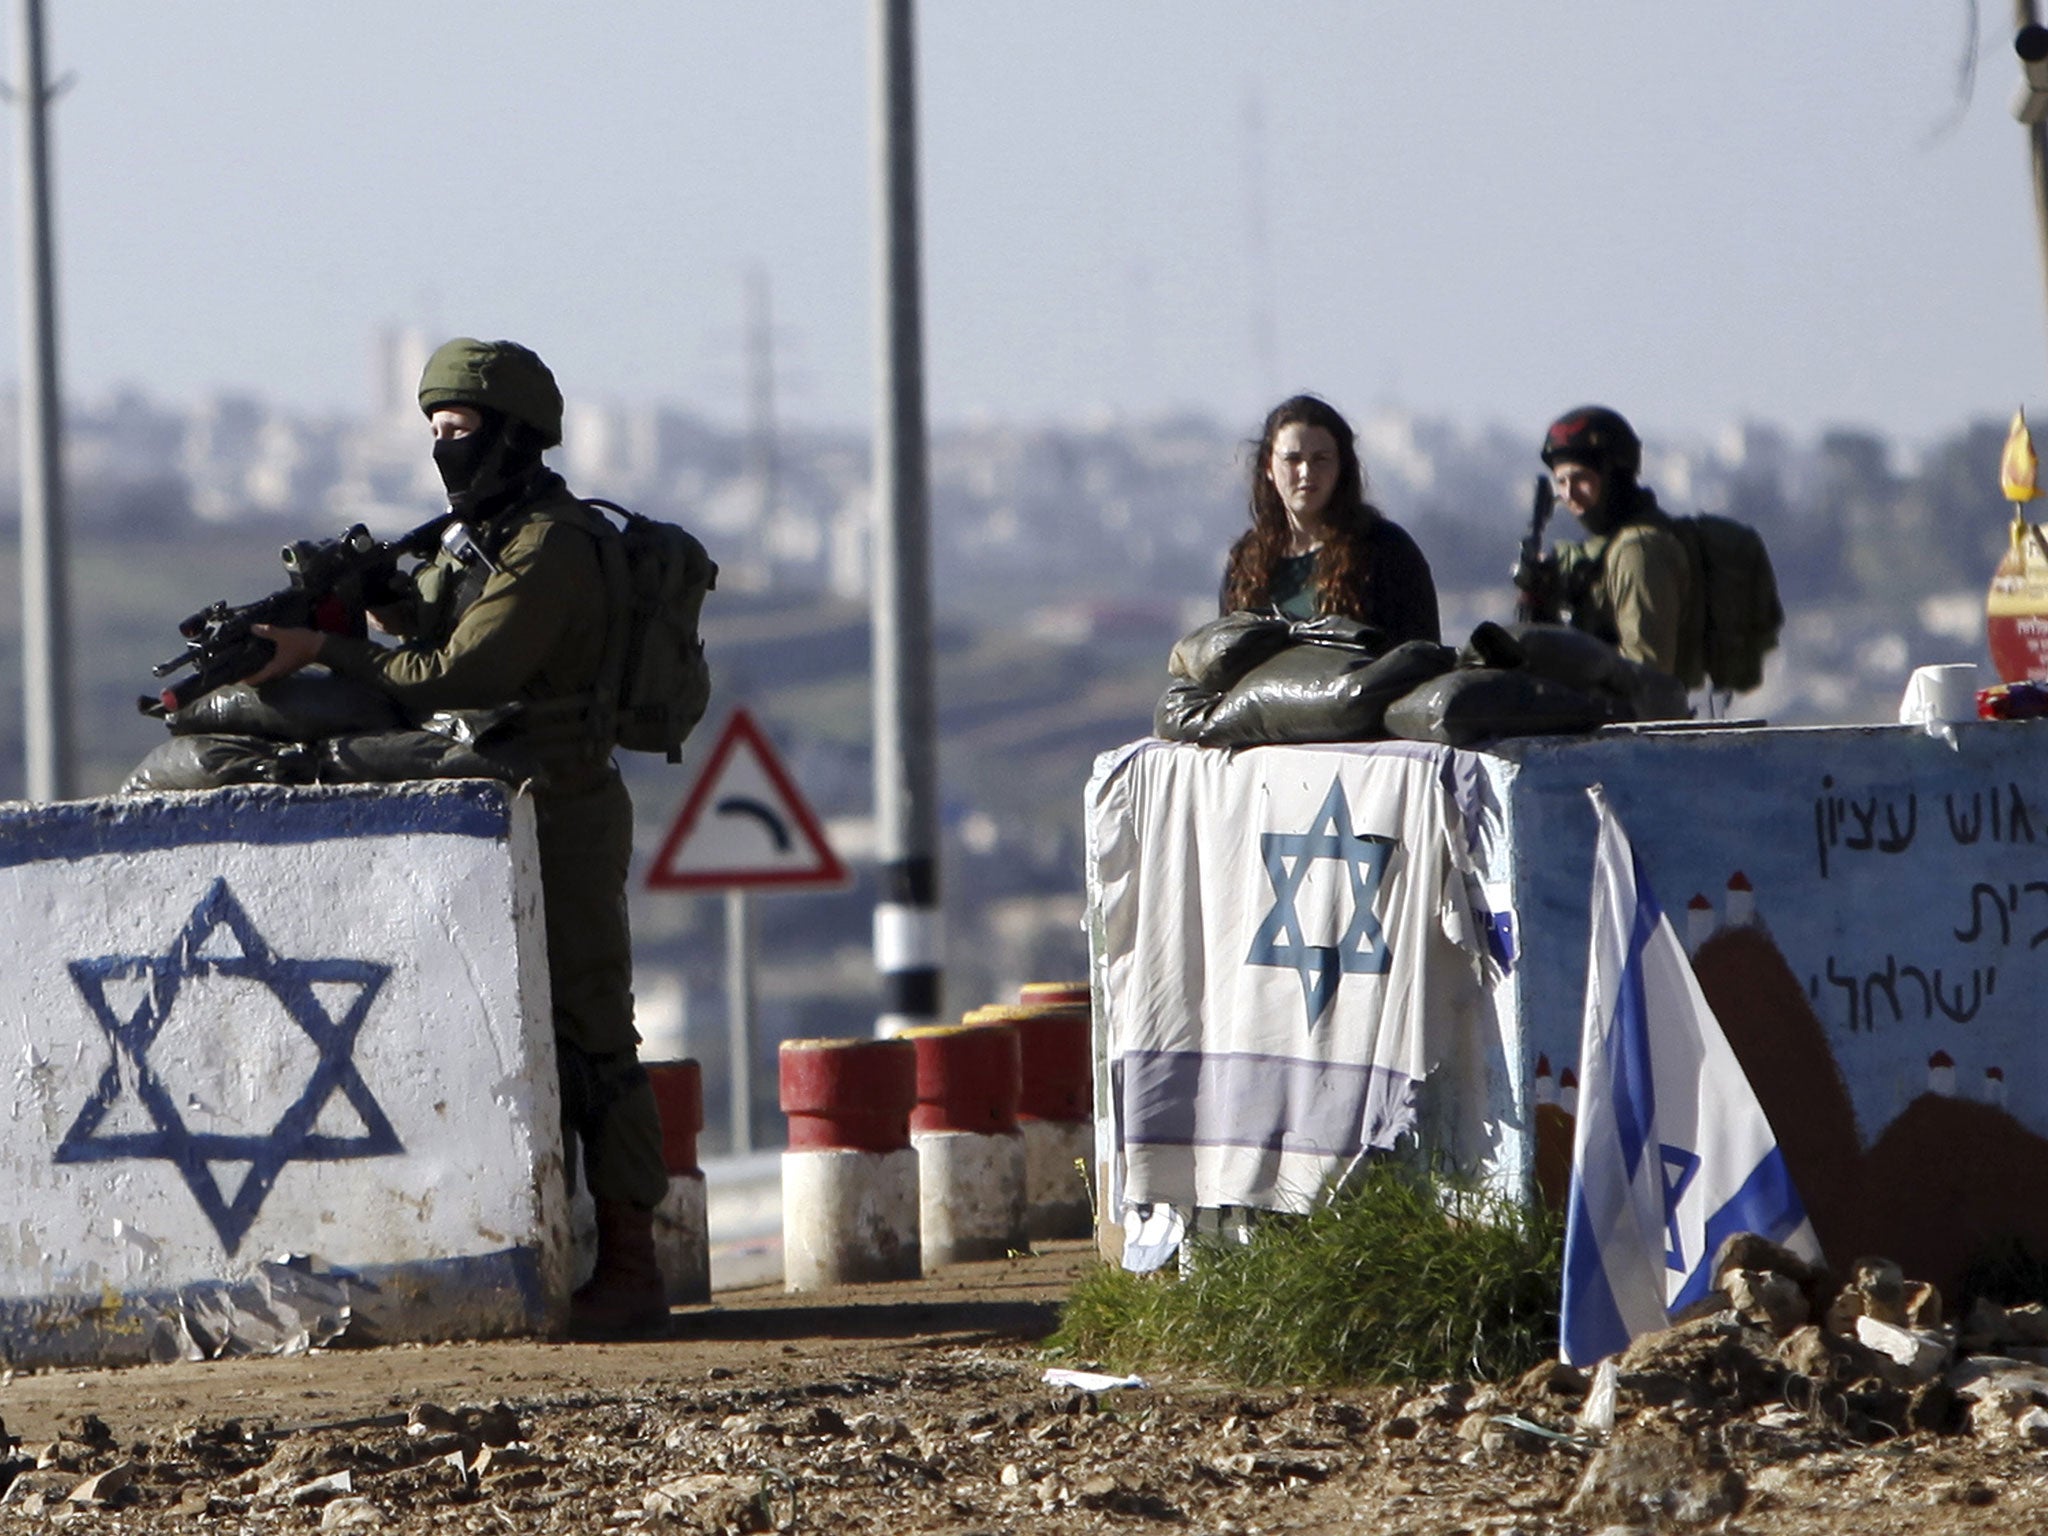 Israeli soldiers stand guard at Gush Etzion junction in the West Bank Friday, March 4, 2016, after a Palestinian woman allegedly tried to run over a soldier with her car.